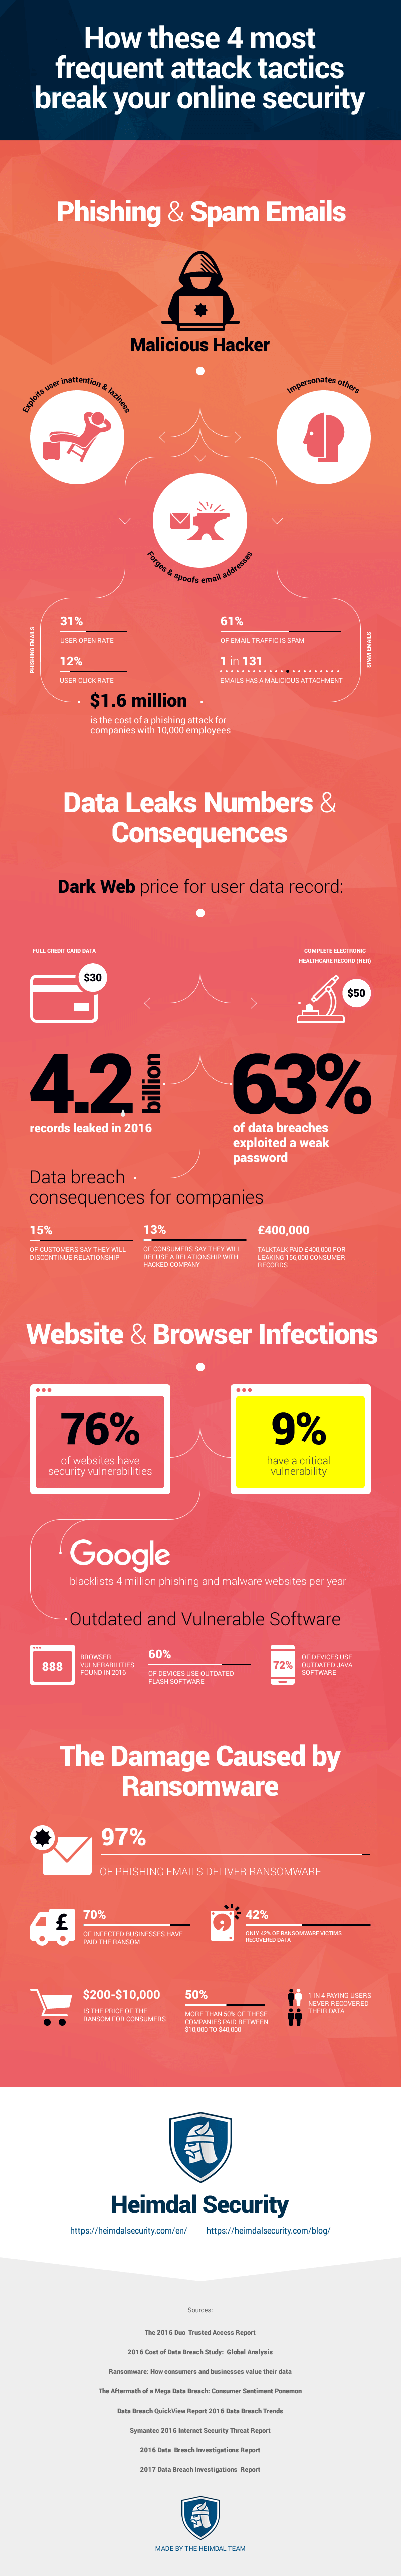 How 4 Types of Cyber Threats Break Your Online Security - #infographic